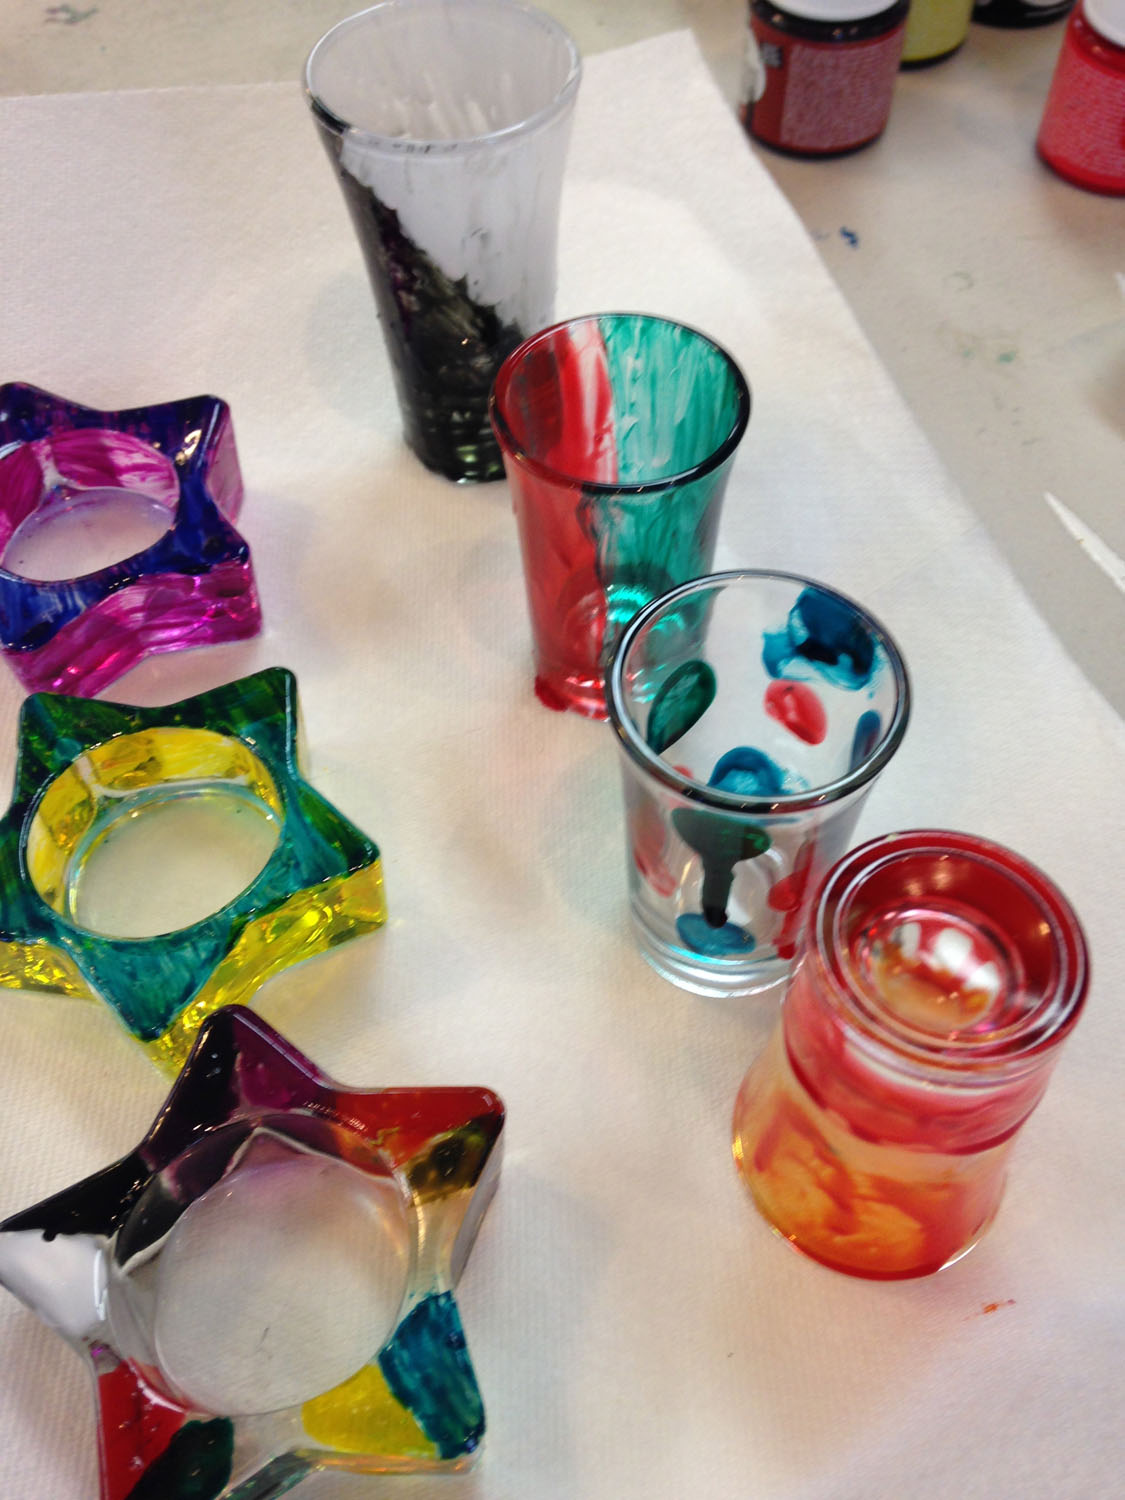 painted-glass-in-kids-art-parties-classes-and-camps-in-greensboro-nc-with-artist-tracey-j-marshallIMG_0267.jpg